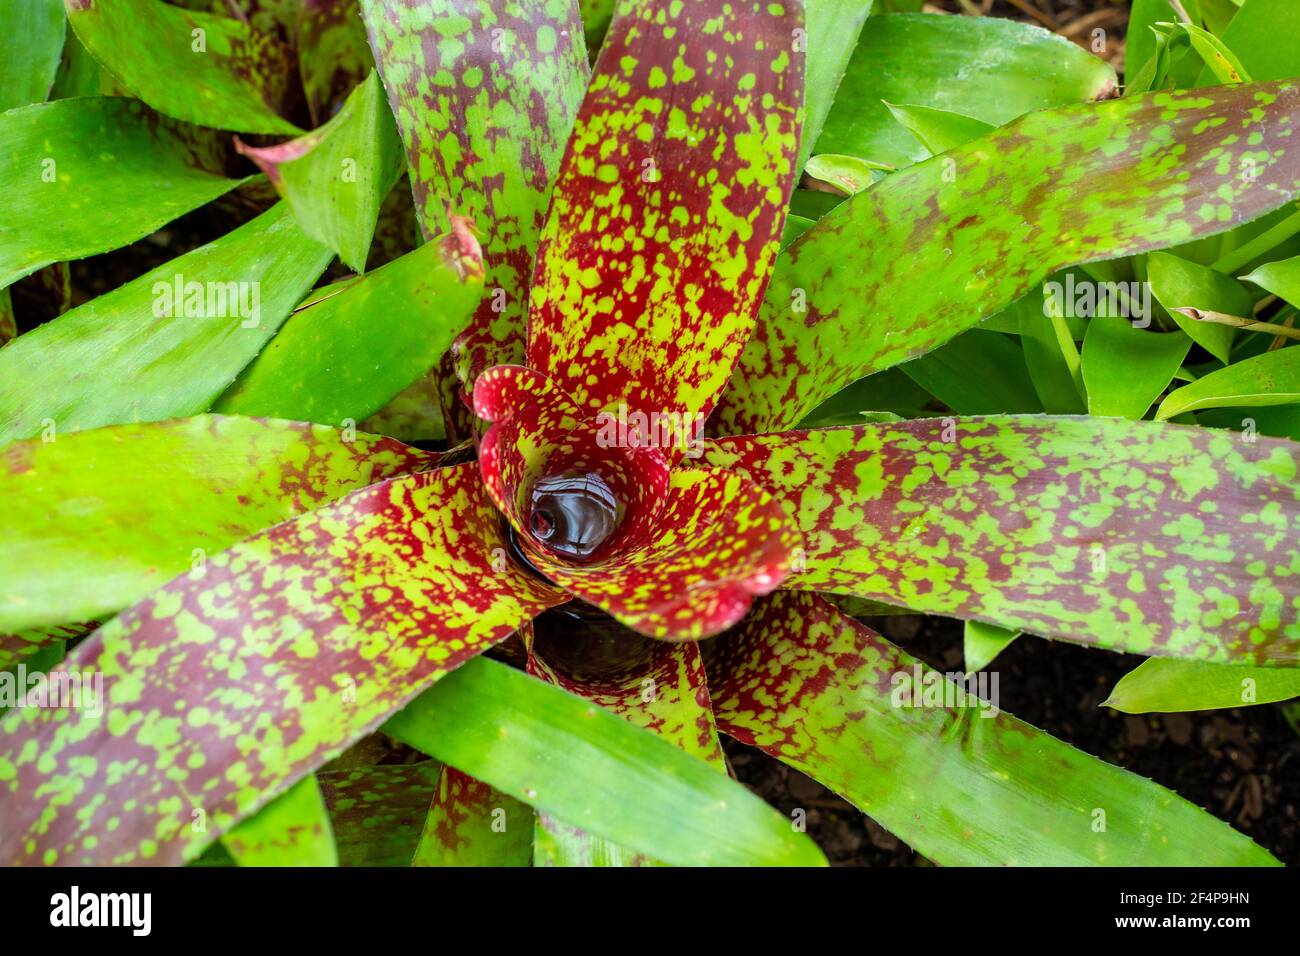 A bromeliad, Neoregelia Gold Fever, on display in the greenhouse at the Public Gardens in Canterbury, New Zealand Stock Photo